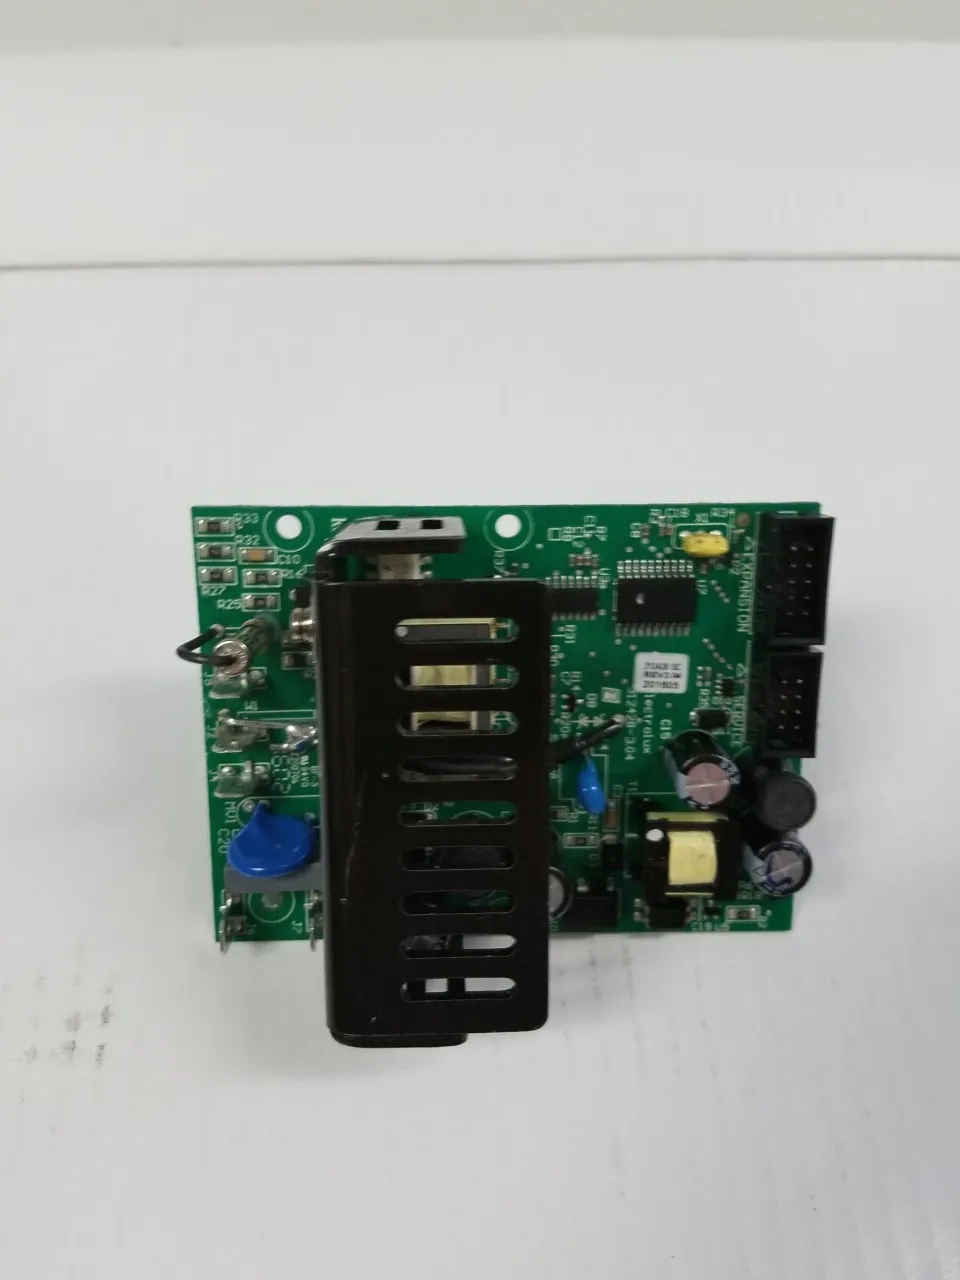 A picture of the front of an electronic board.